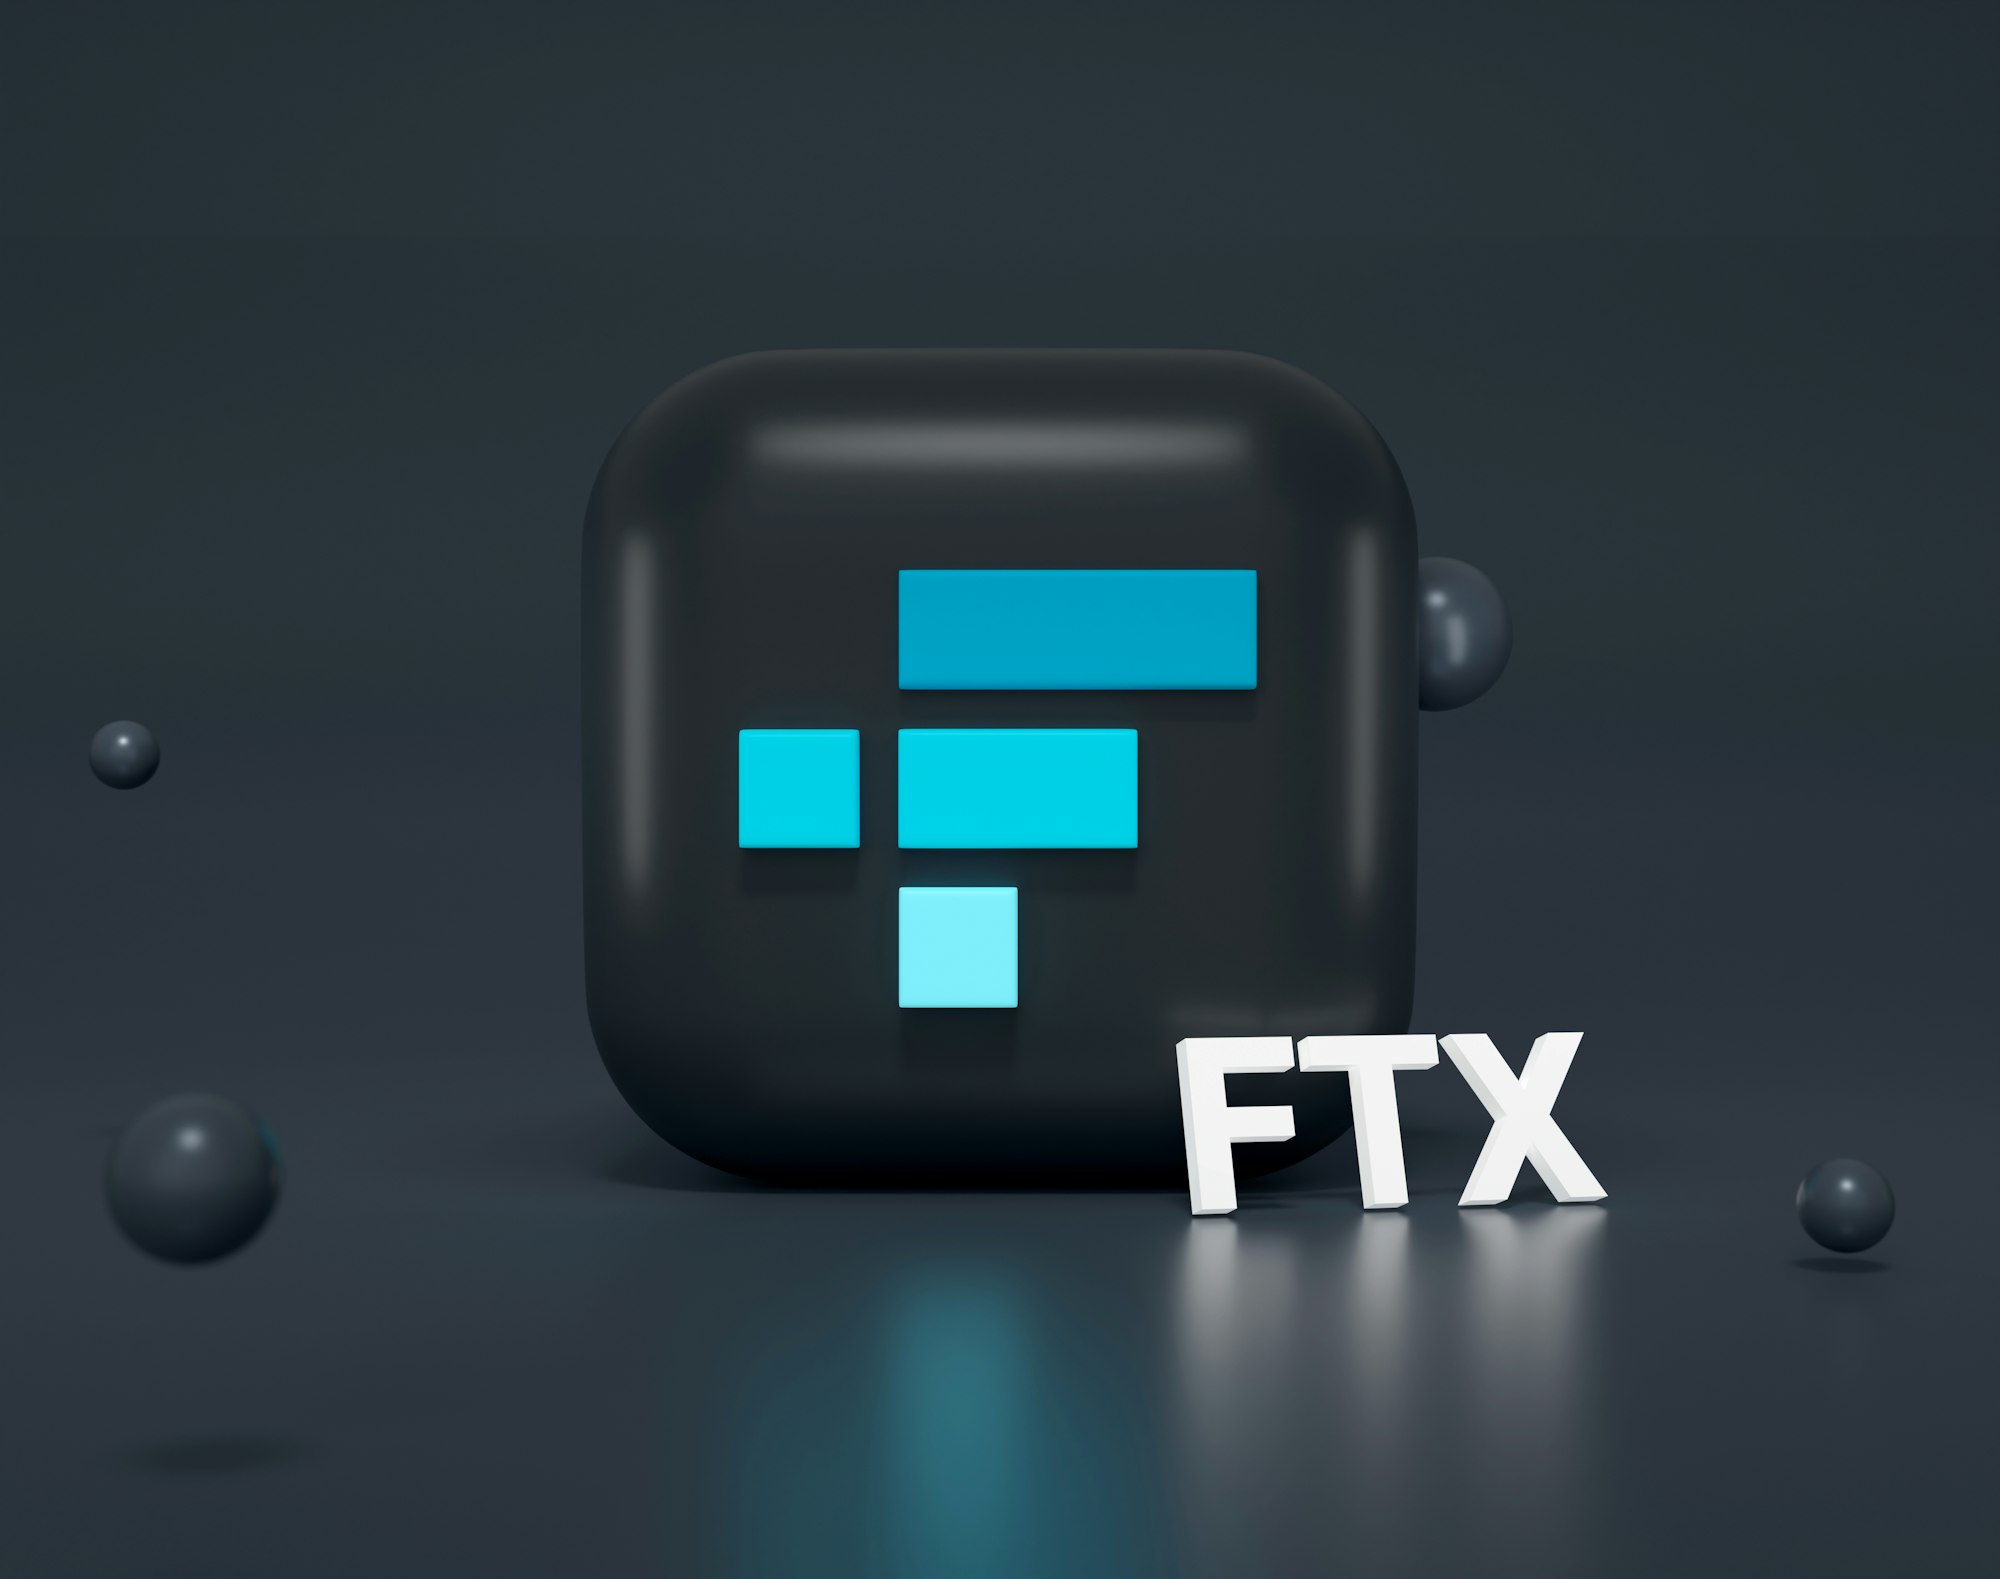 FTX Crypto Exchange logo in 3D. Feel free to contact me through email mariia.shalabaieva@gmail.com. Check out my previous collections “Top Cryptocurrencies”, "Elon Musk" and other 3D projects!